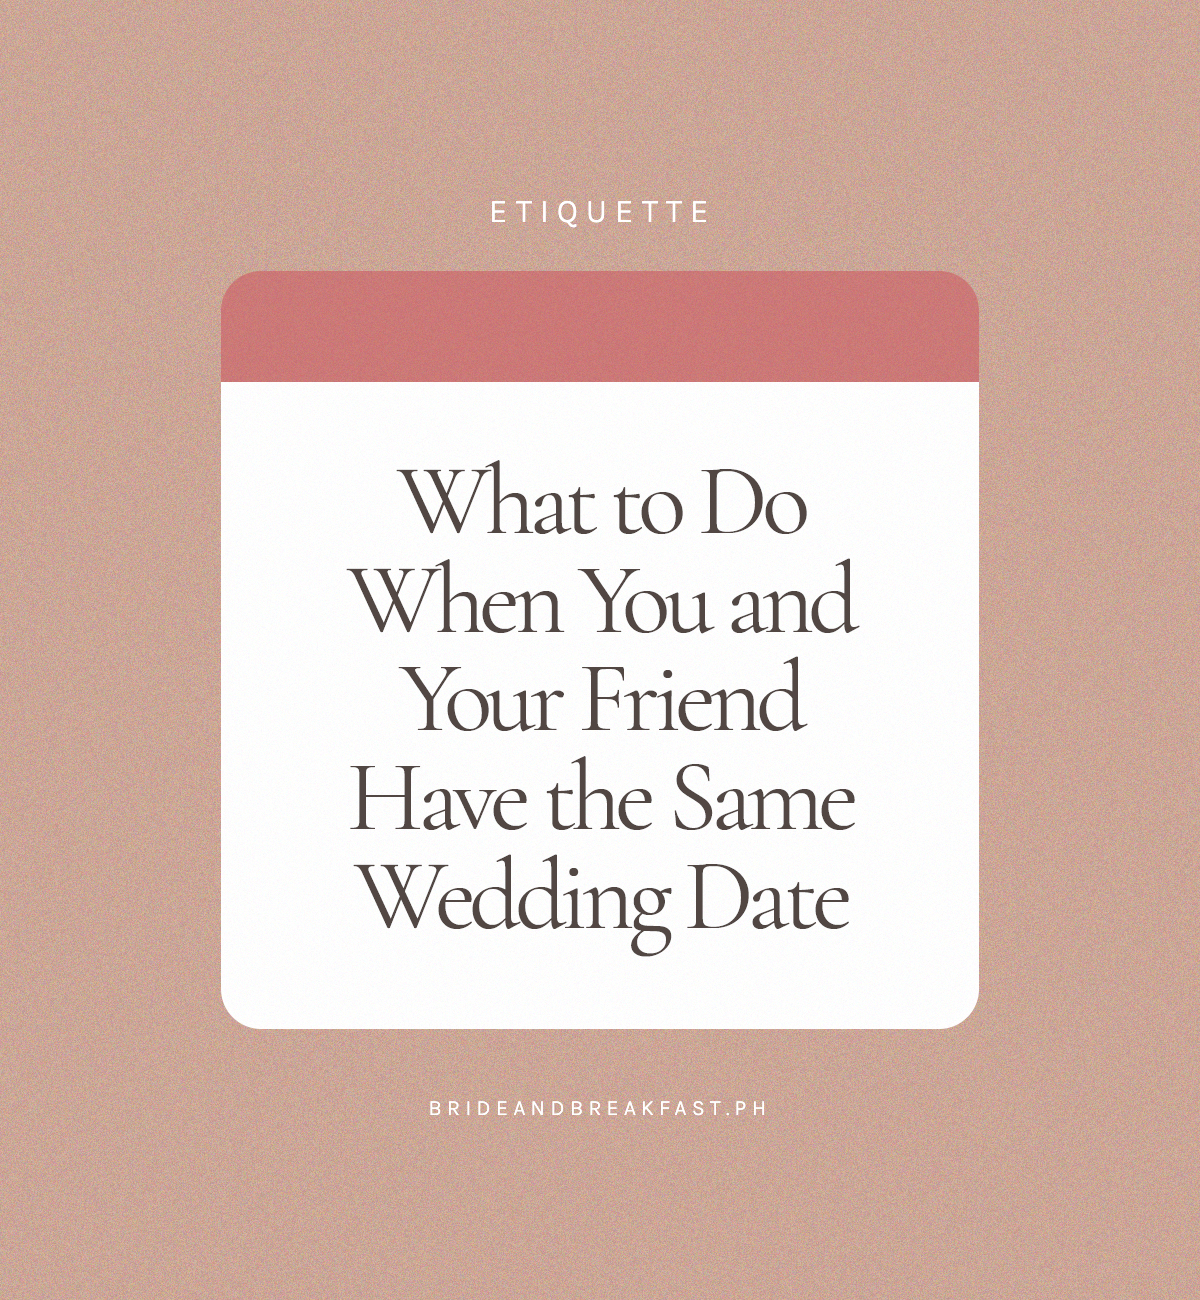 What to Do When You and Your Friend Have the Same Wedding Date